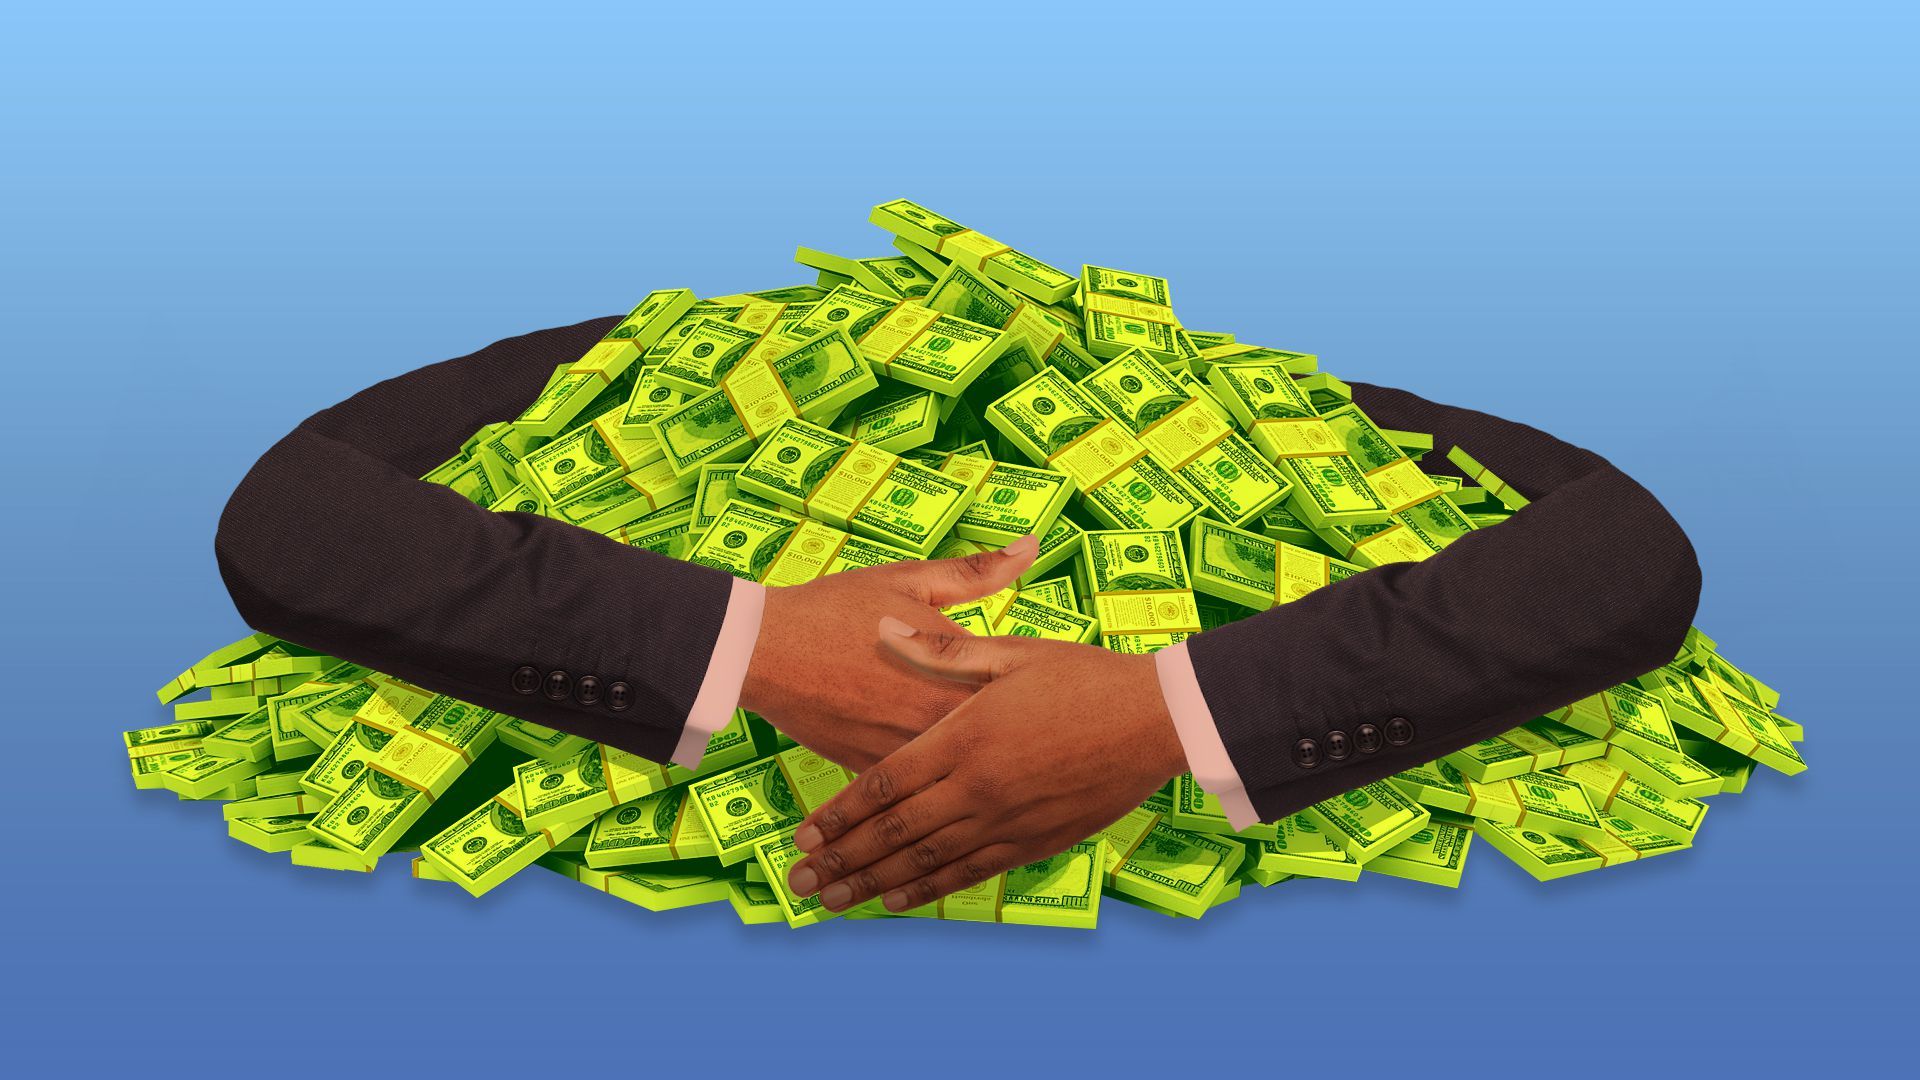 Illustration of a pair of hands holding a giant pile of money